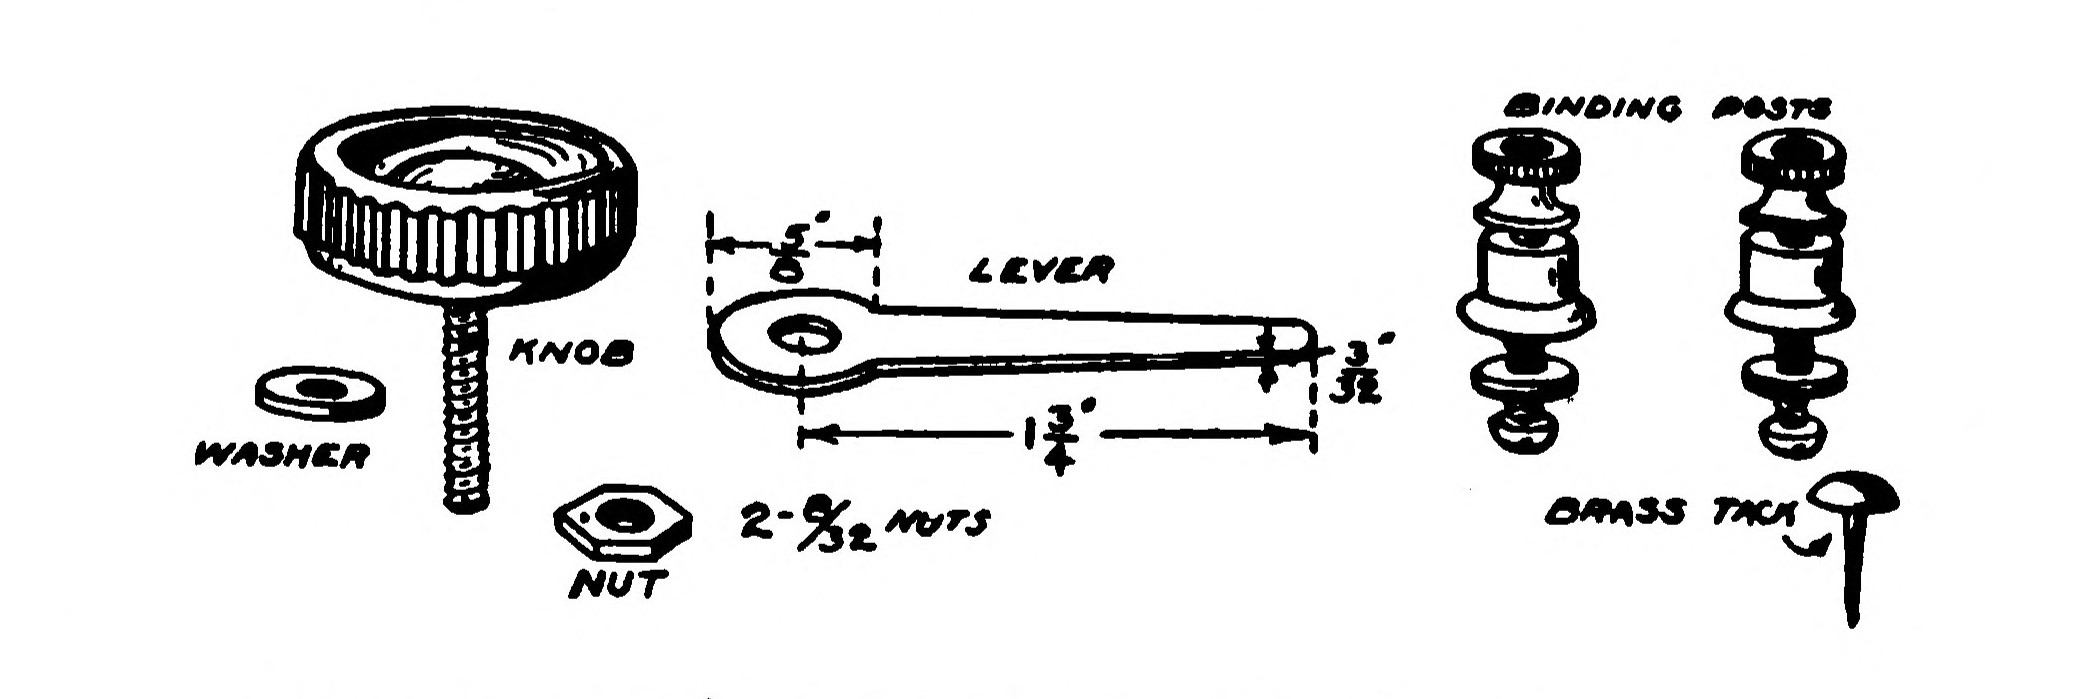 FIG. 81.—The Lever, Knob, Binding Posts, etc.